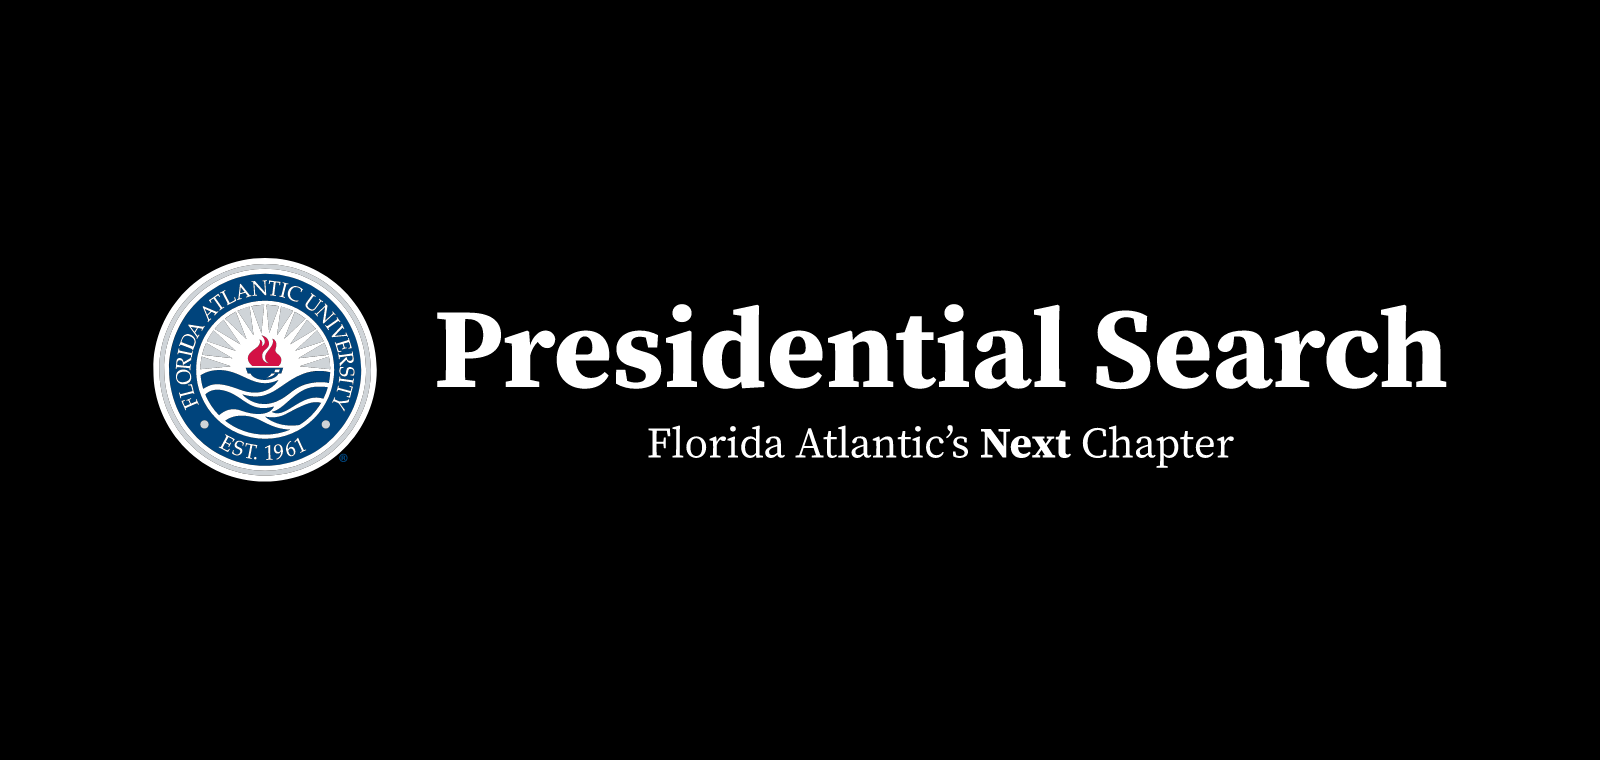 Presidential Search - Florida Atlantic's Next Chapter